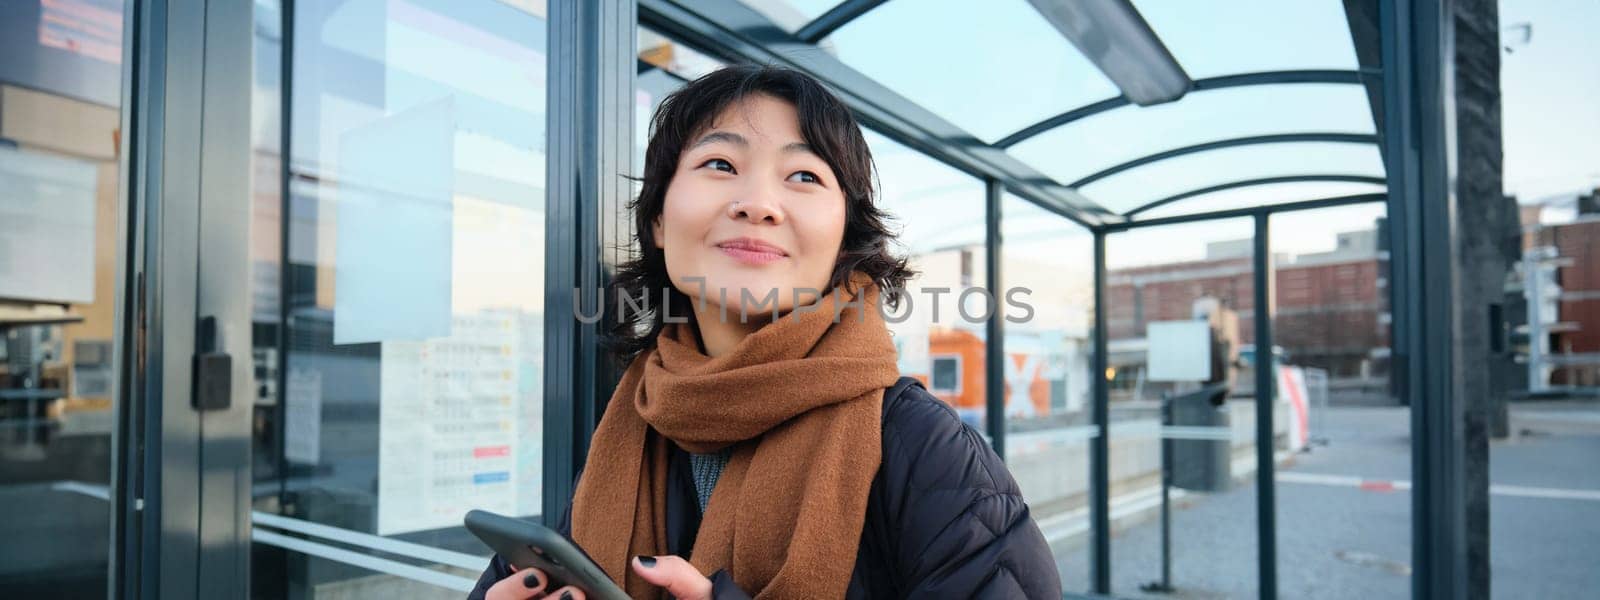 Beautiful Japanese girl, student standing on bus stop in winter jacket, holding smartphone, using application to track her public transport, ordering a ride.